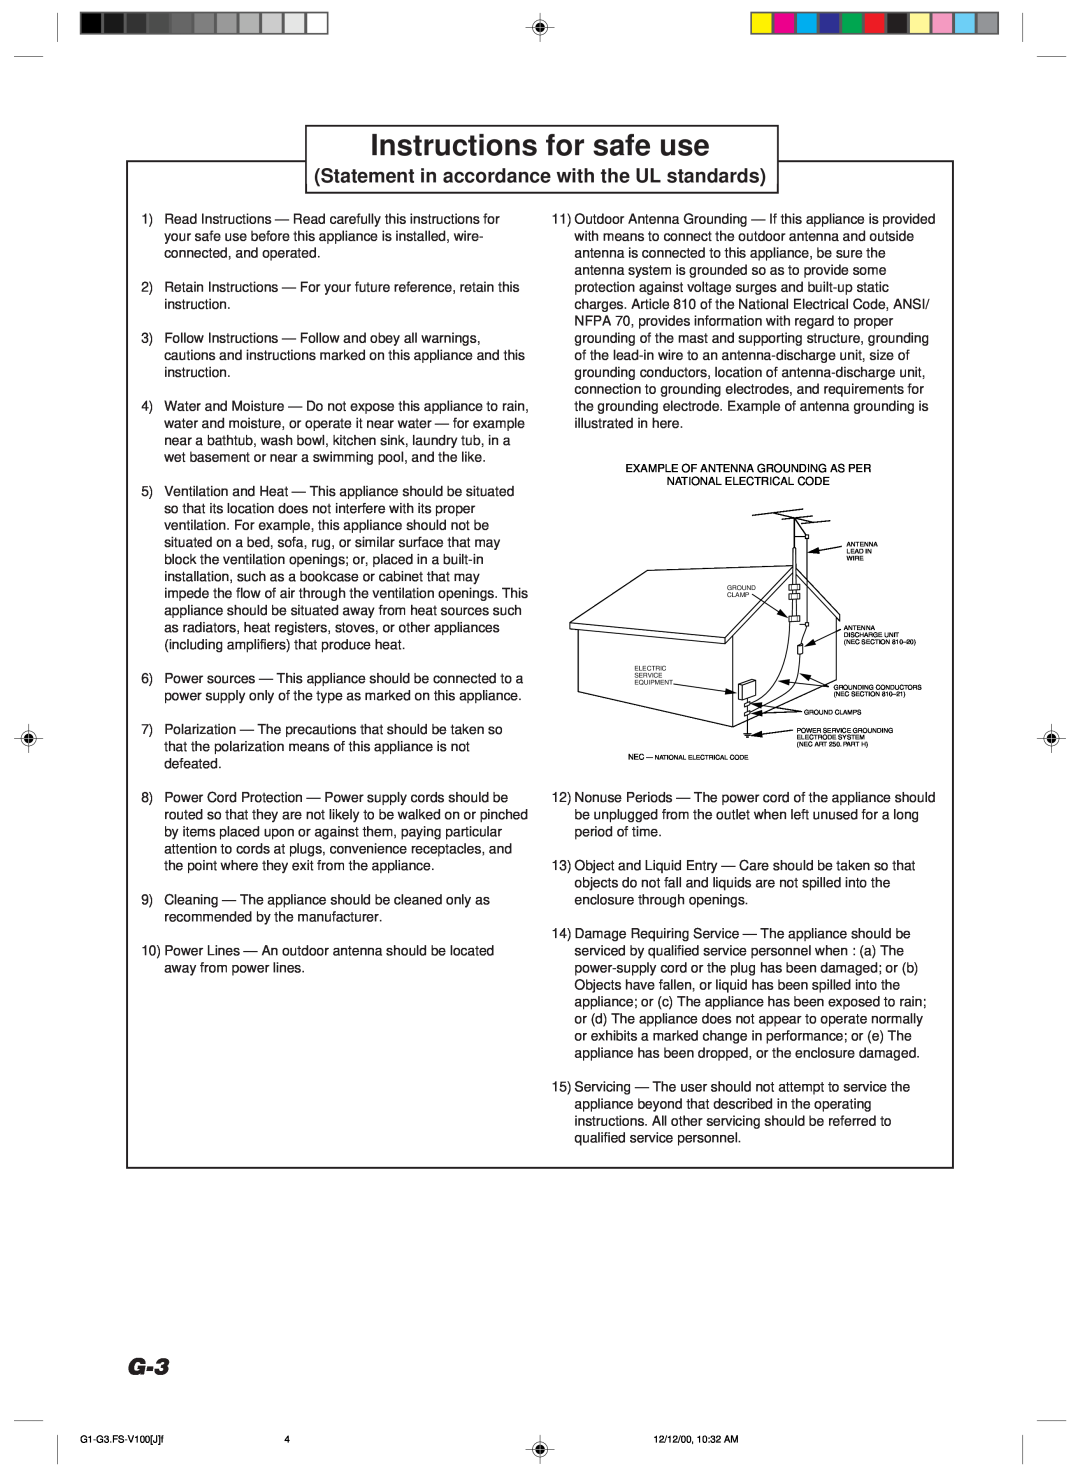 JVC FS-V100 manual Instructions for safe use, Statement in accordance with the UL standards 